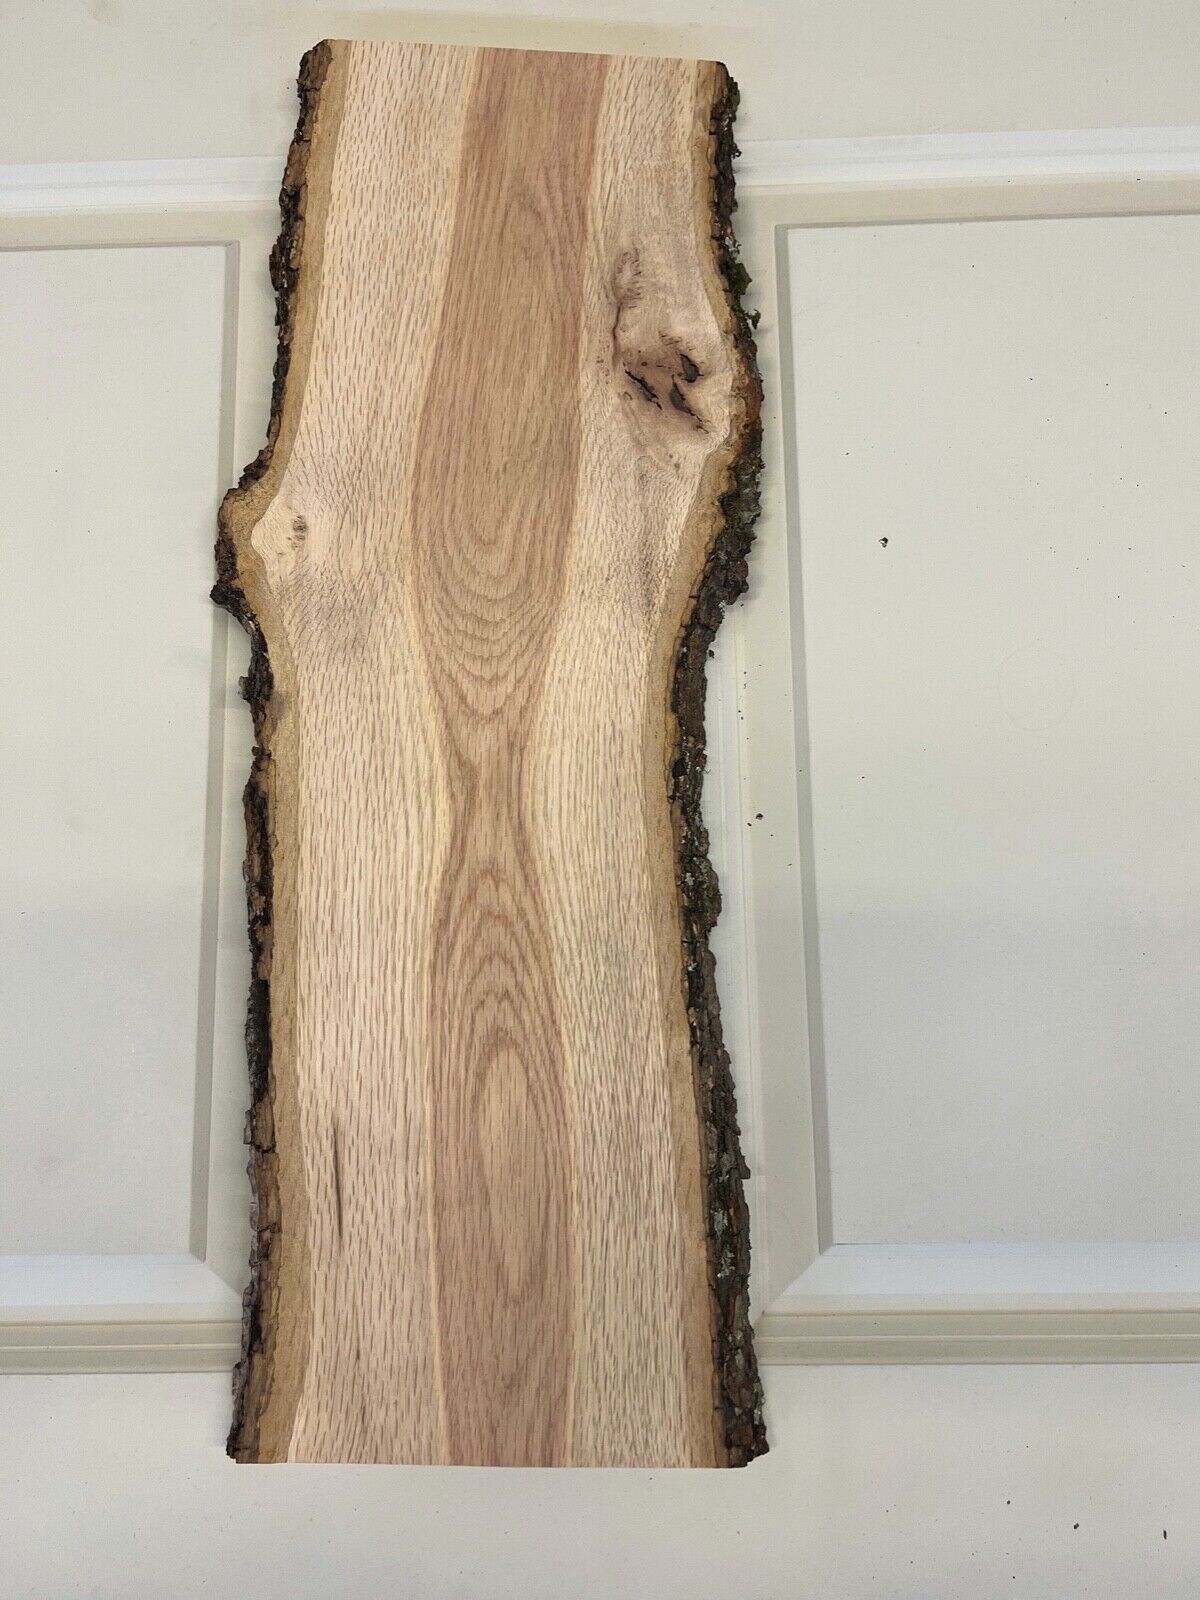 Red Oak Live Edge Slab Kiln Dried and Planed | Various Sizes | Ships Free